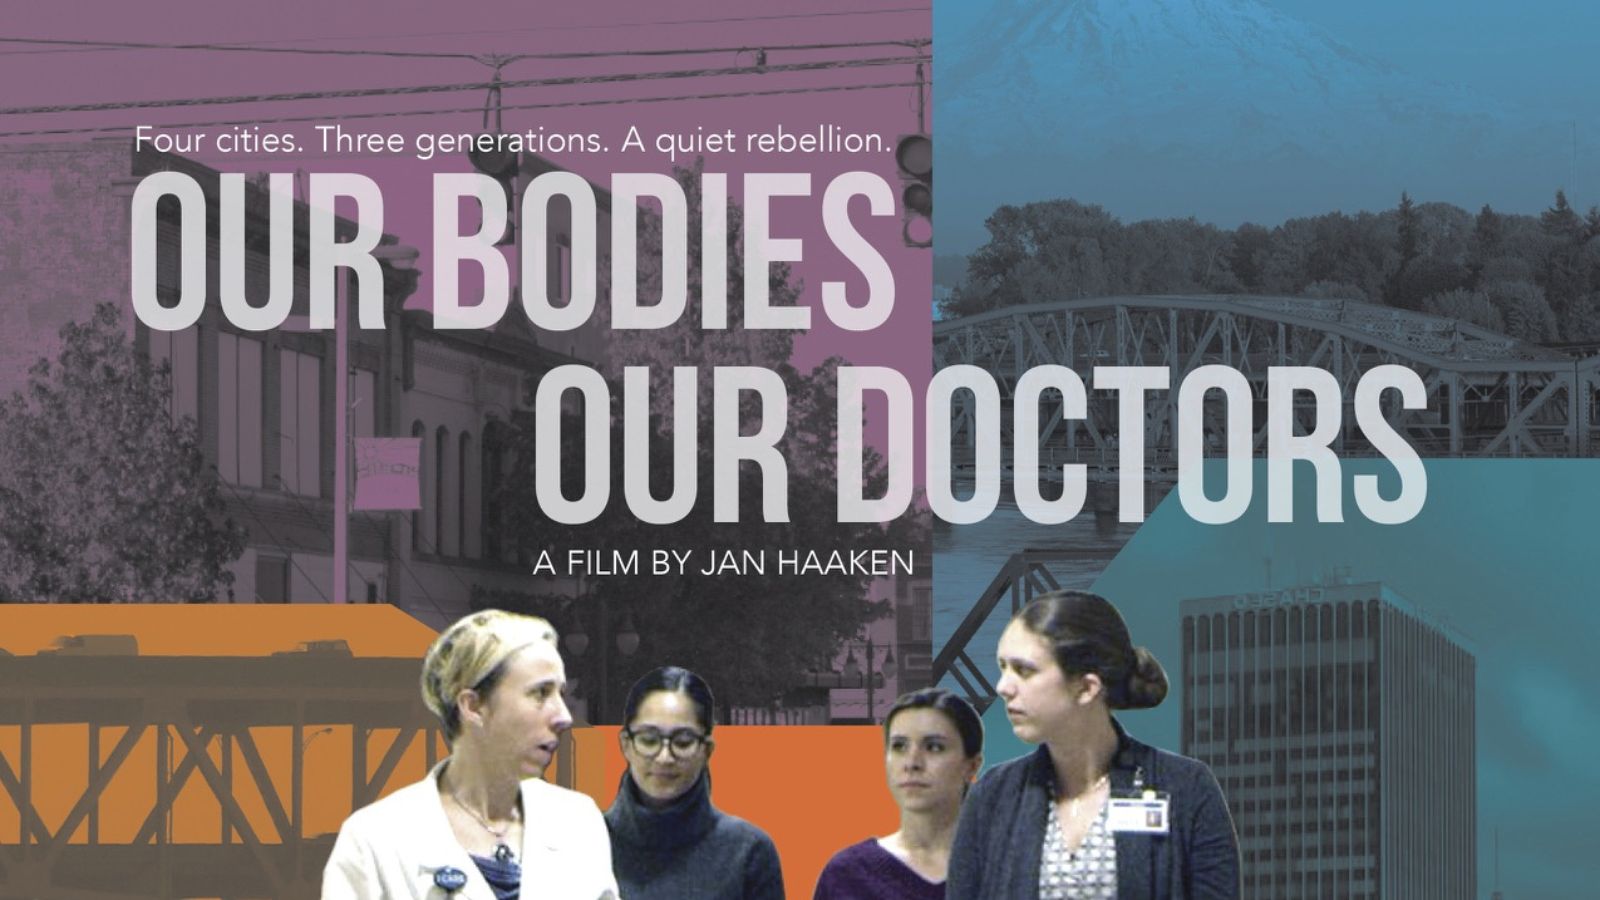 SIFF to host one-night-only screening of Our Bodies, Our Doctors